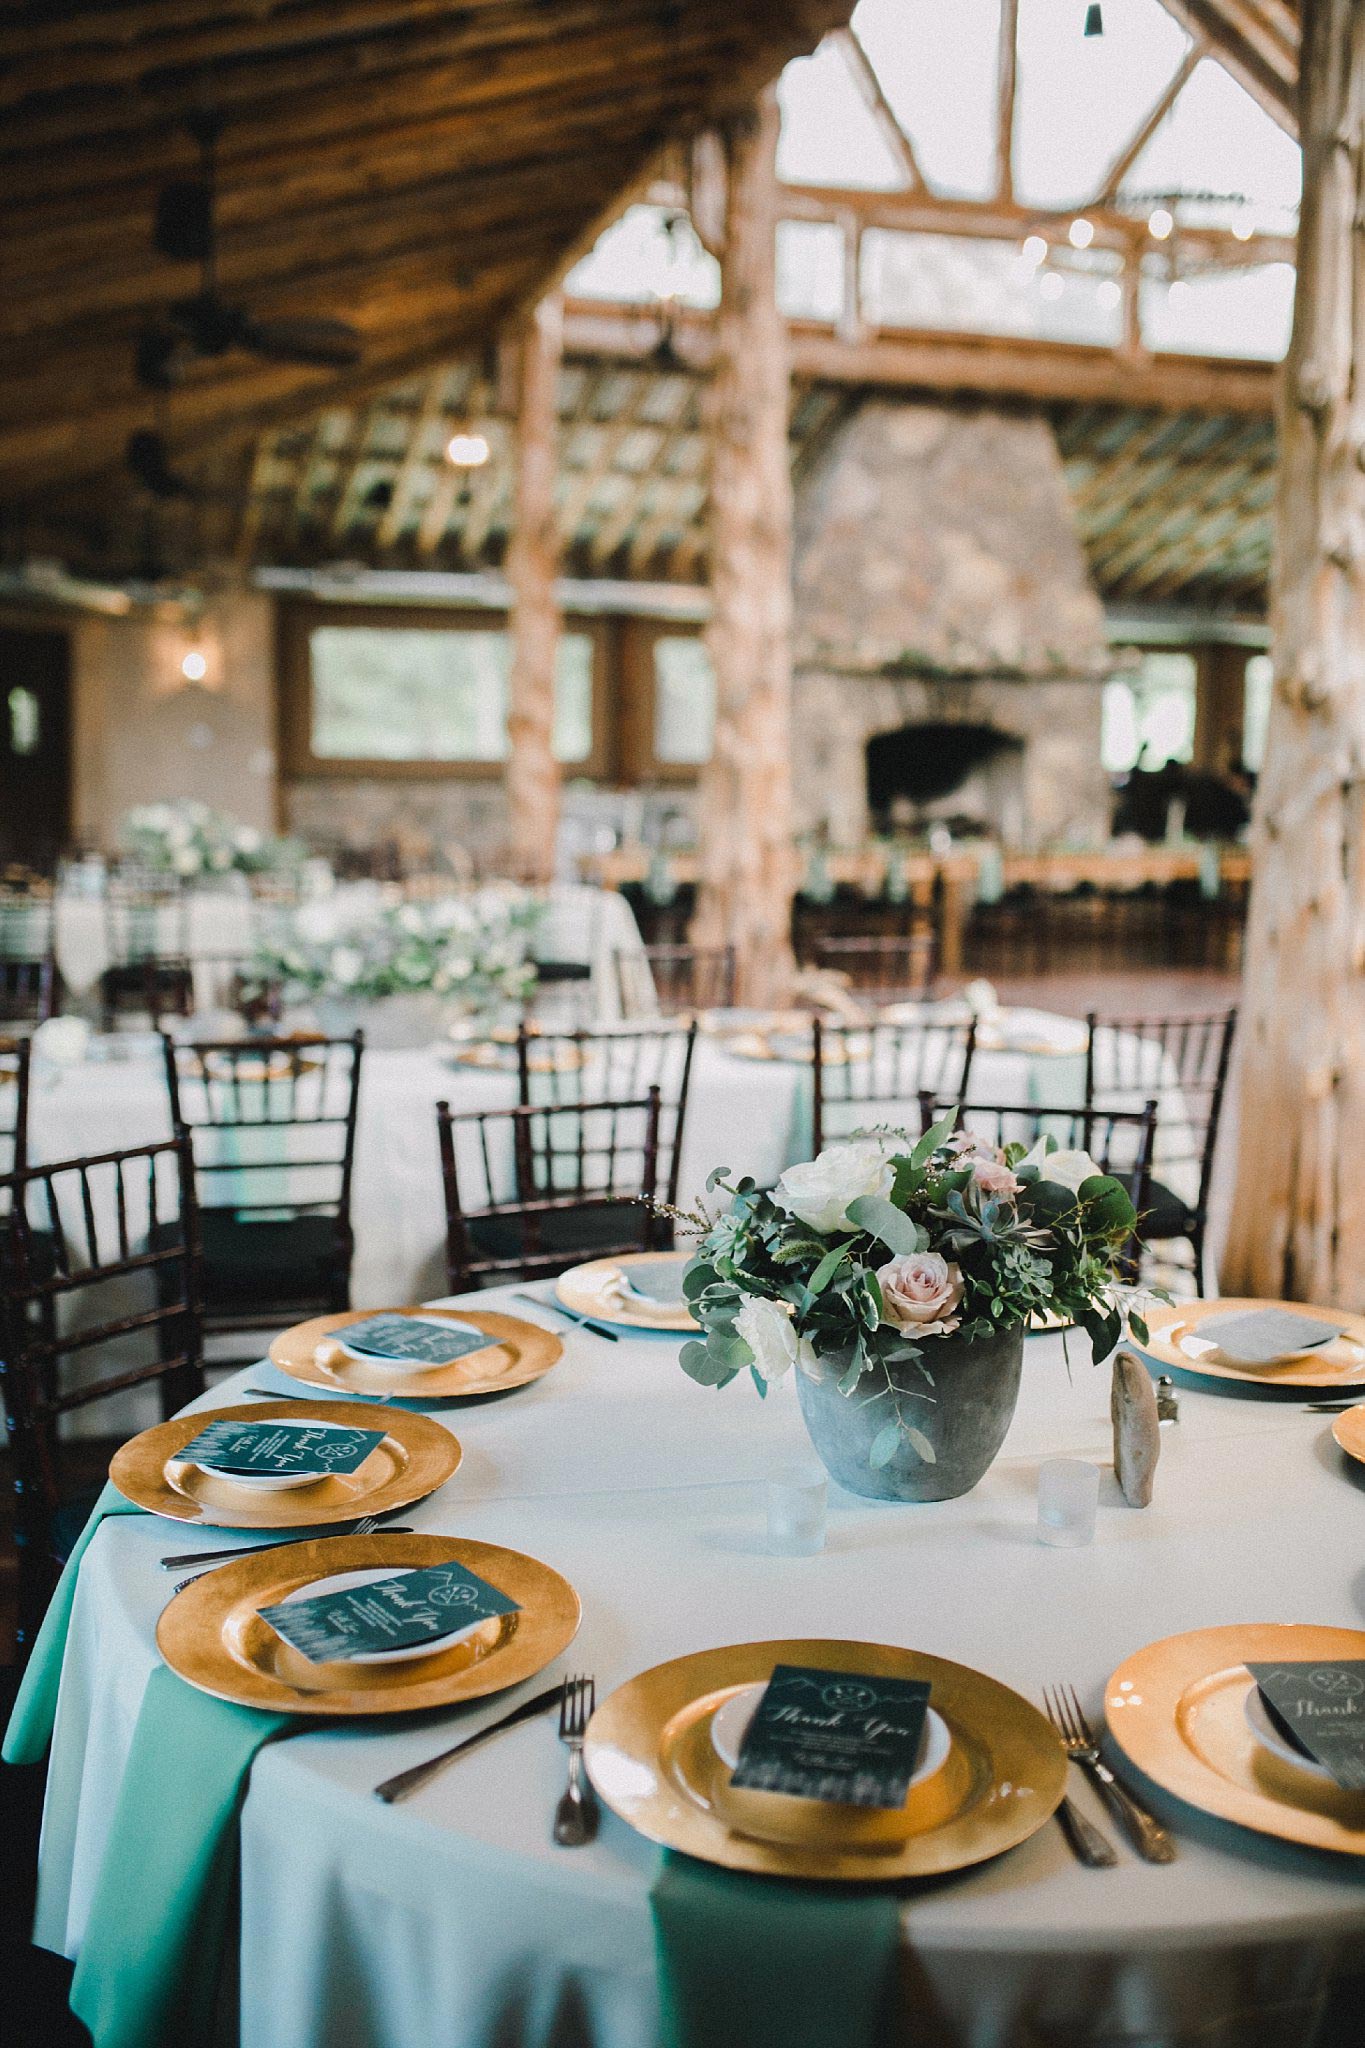 Organic wedding at brooks at weatherford wedding reception with ivory tablecloths and sage green napkins